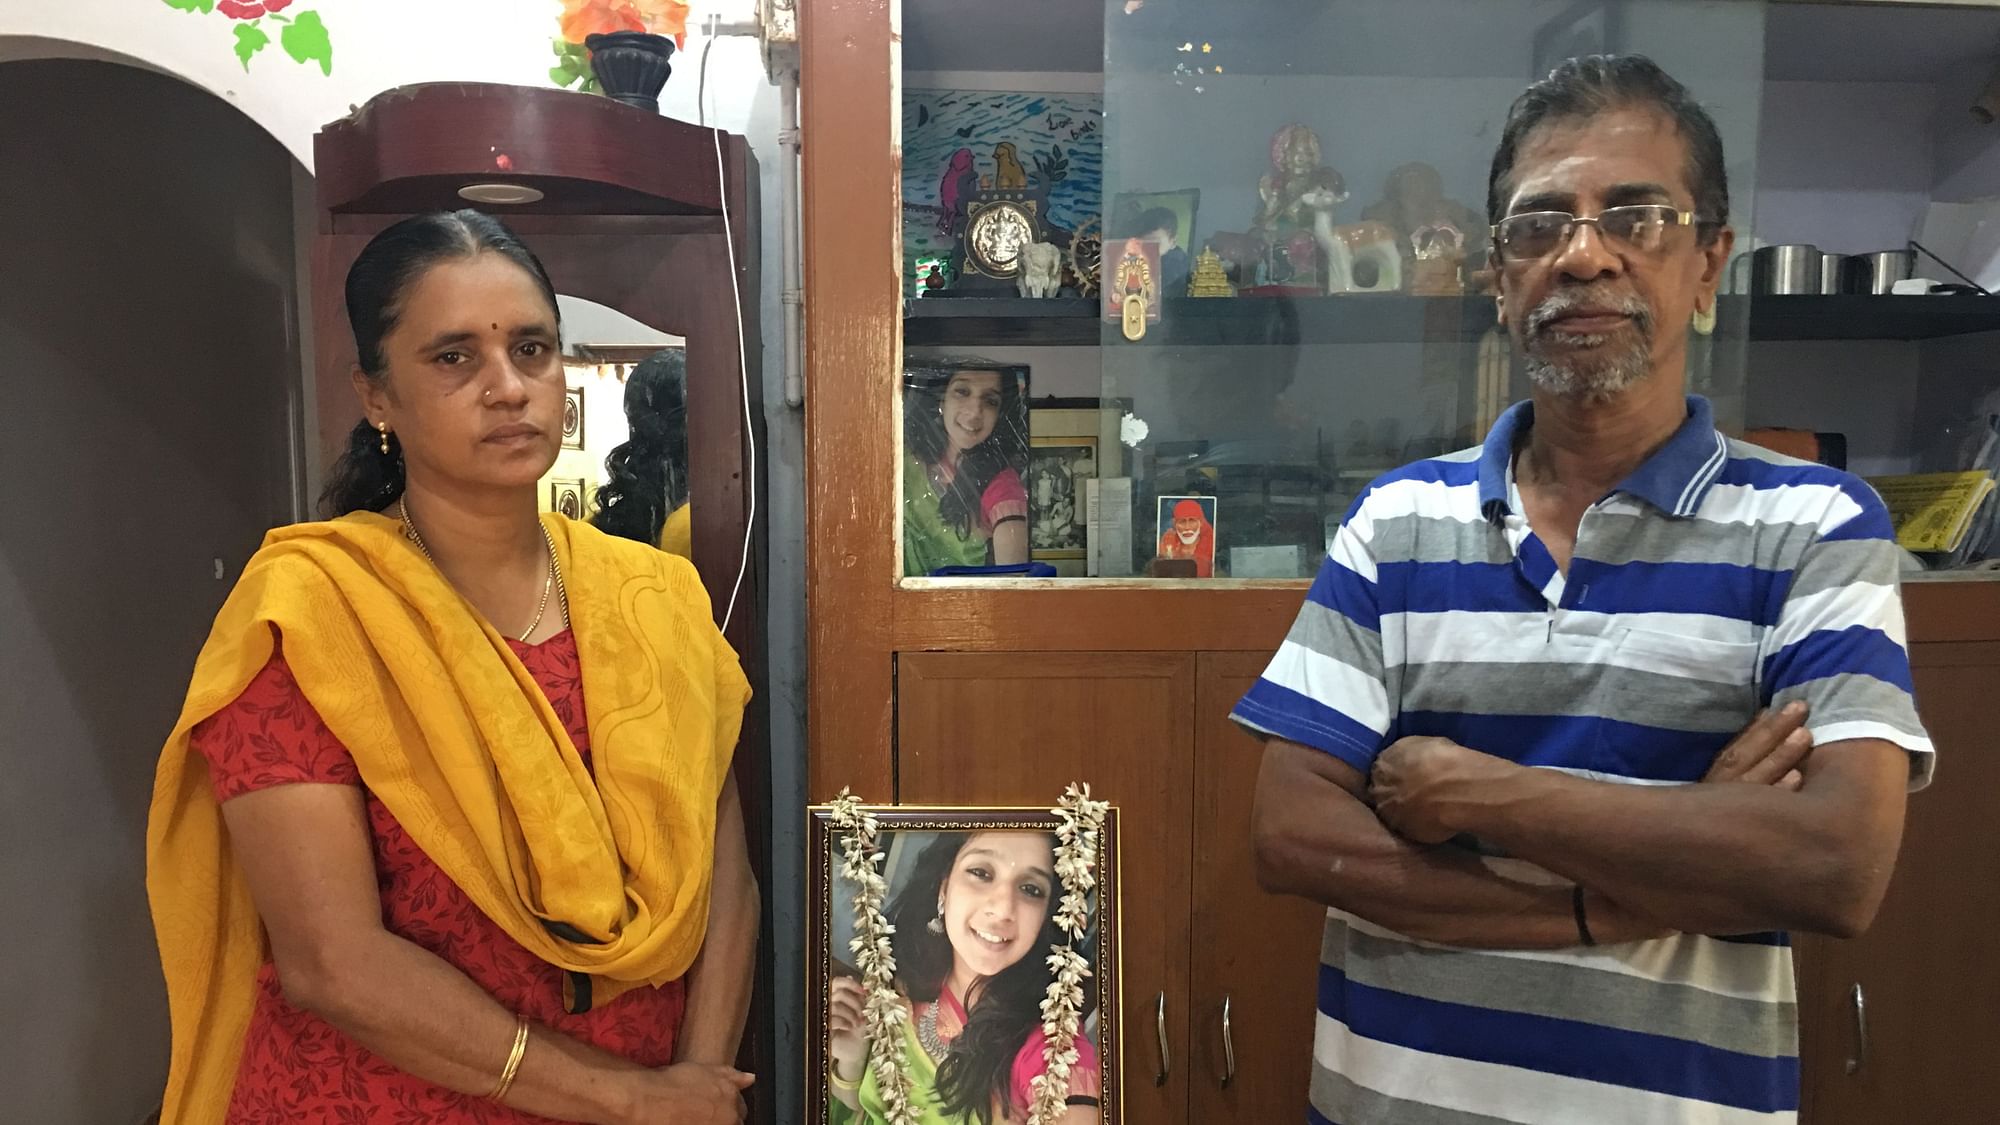 Ravi and Geetha talk about how gruelling days since their daughter Subhasri lost her life have been.